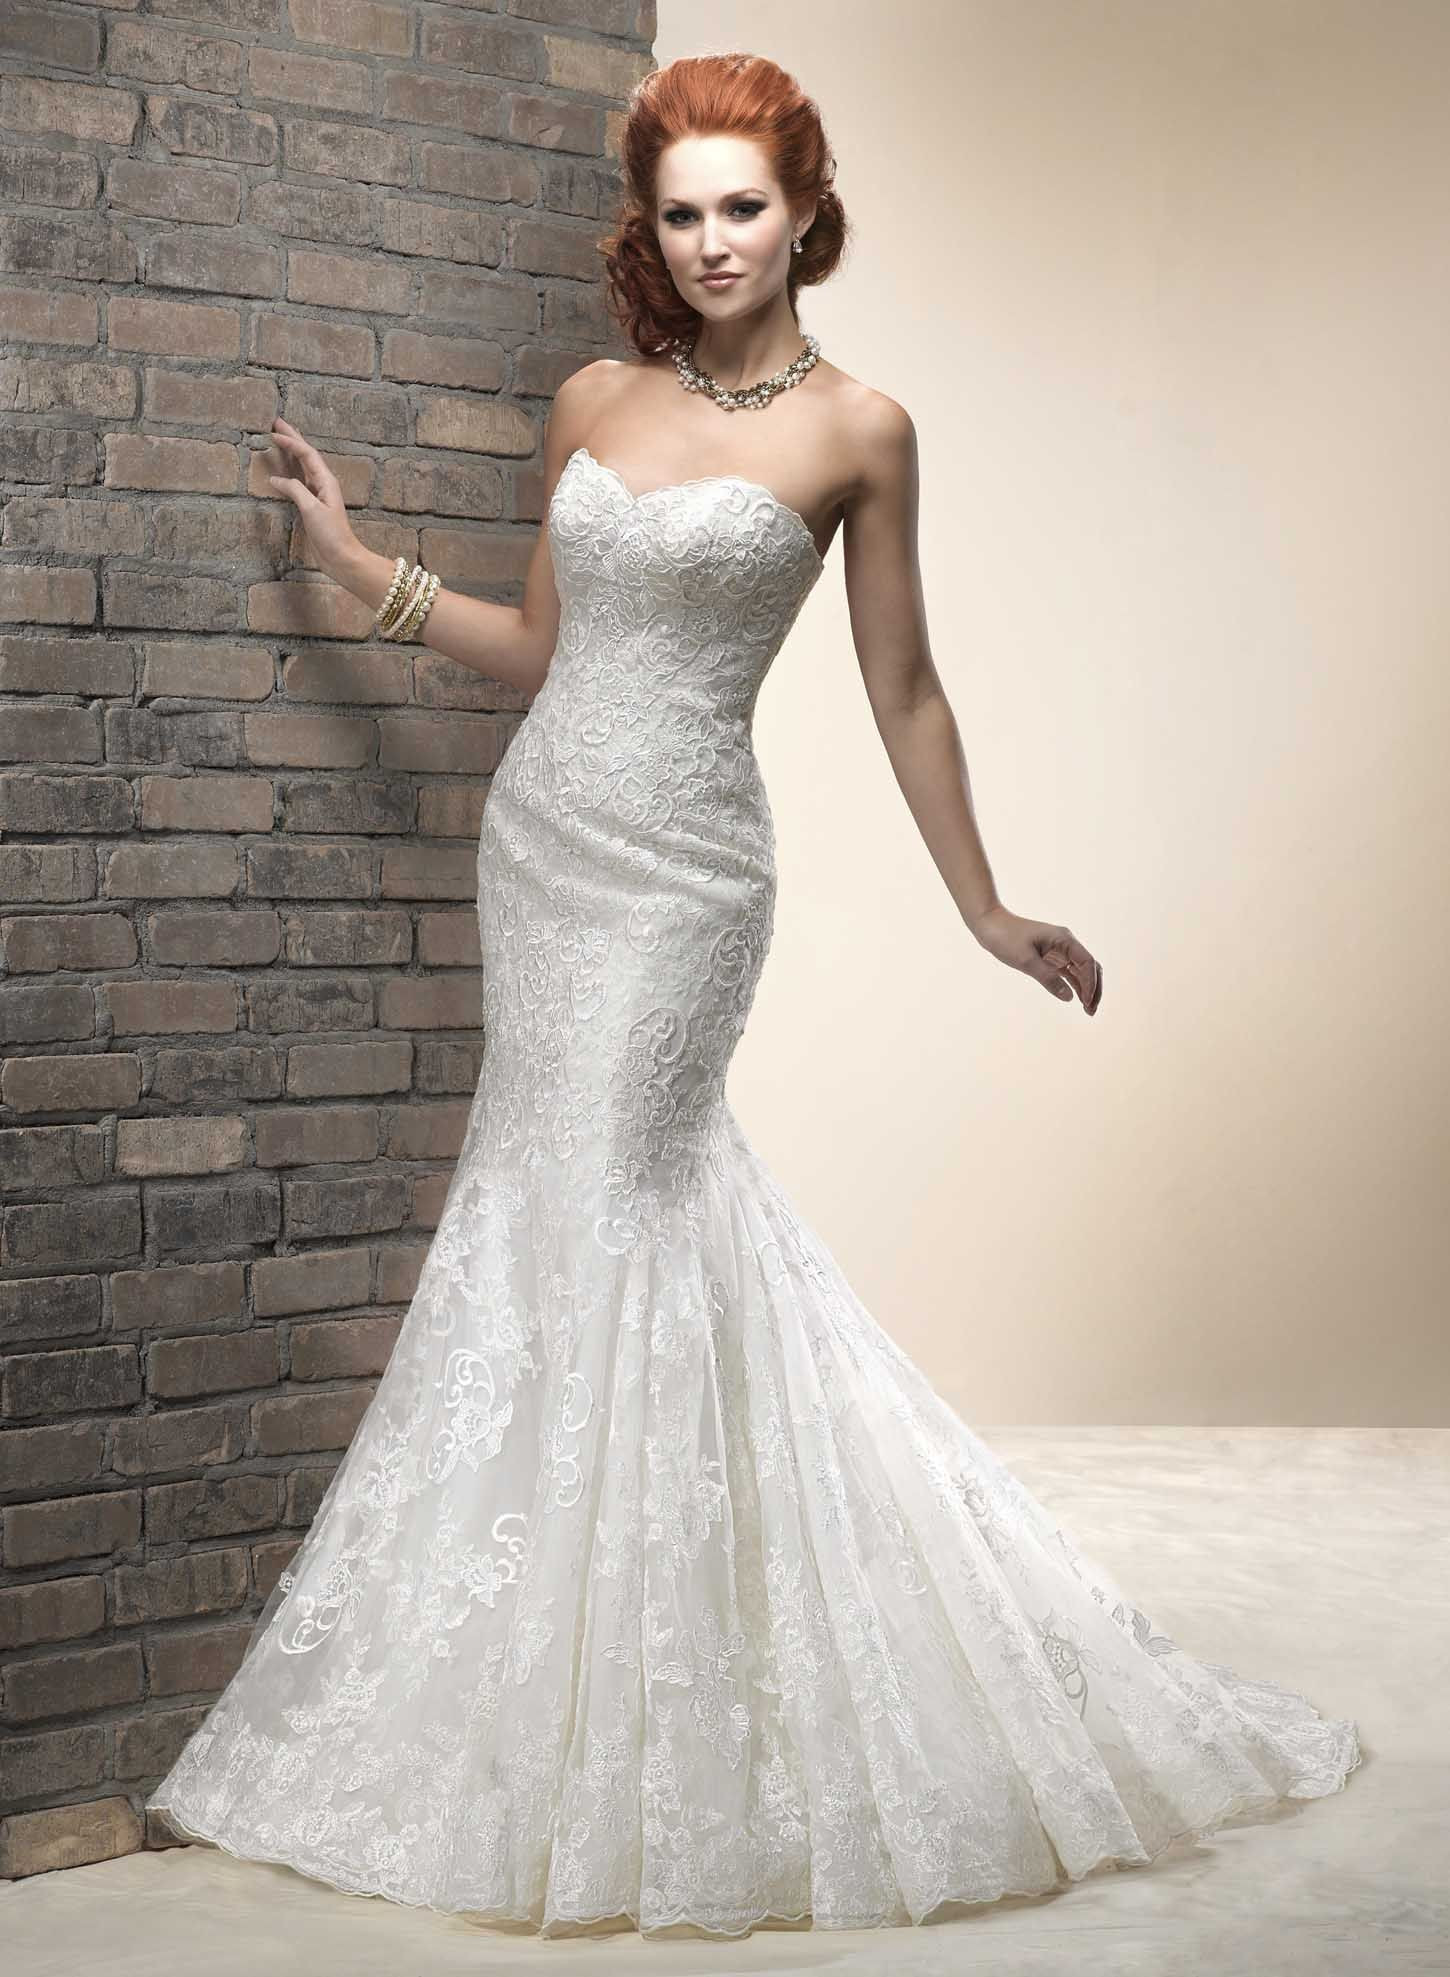 Mermaid Dresses Wedding
 Show Your Beauty in Lace Wedding Dresses on Wedding